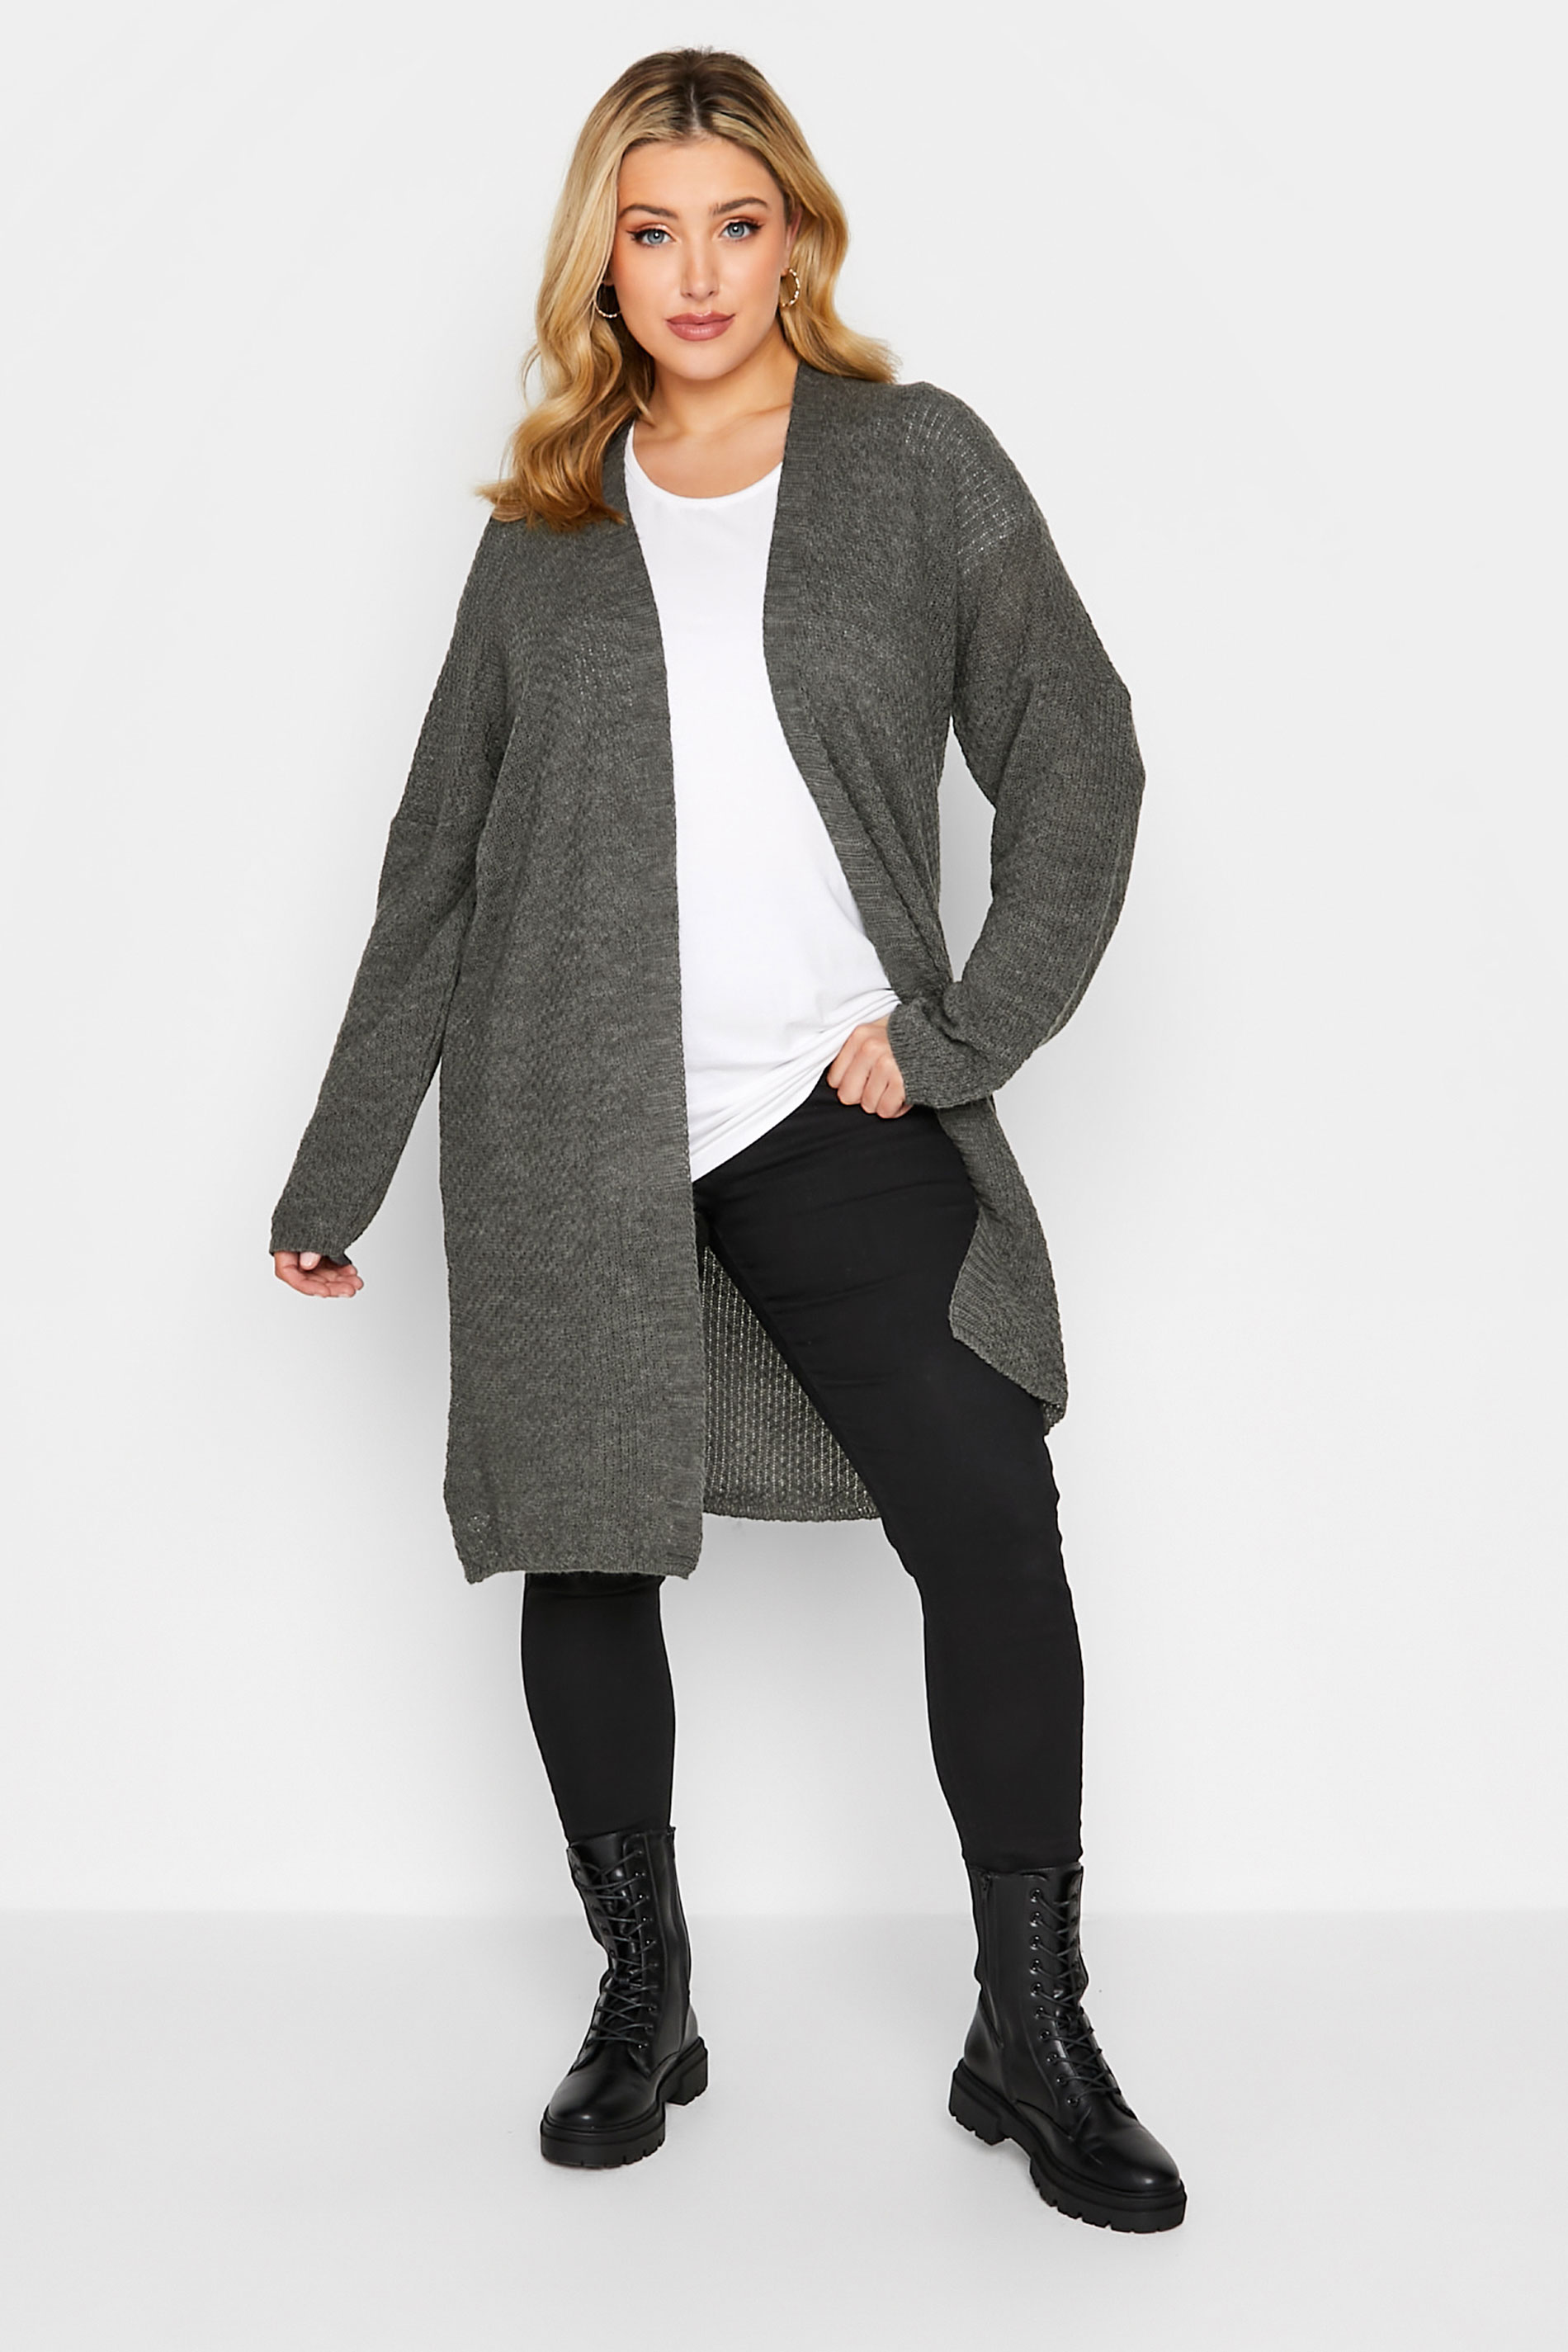 Plus Size Charcoal Grey Knitted Cardigan | Yours Clothing 1